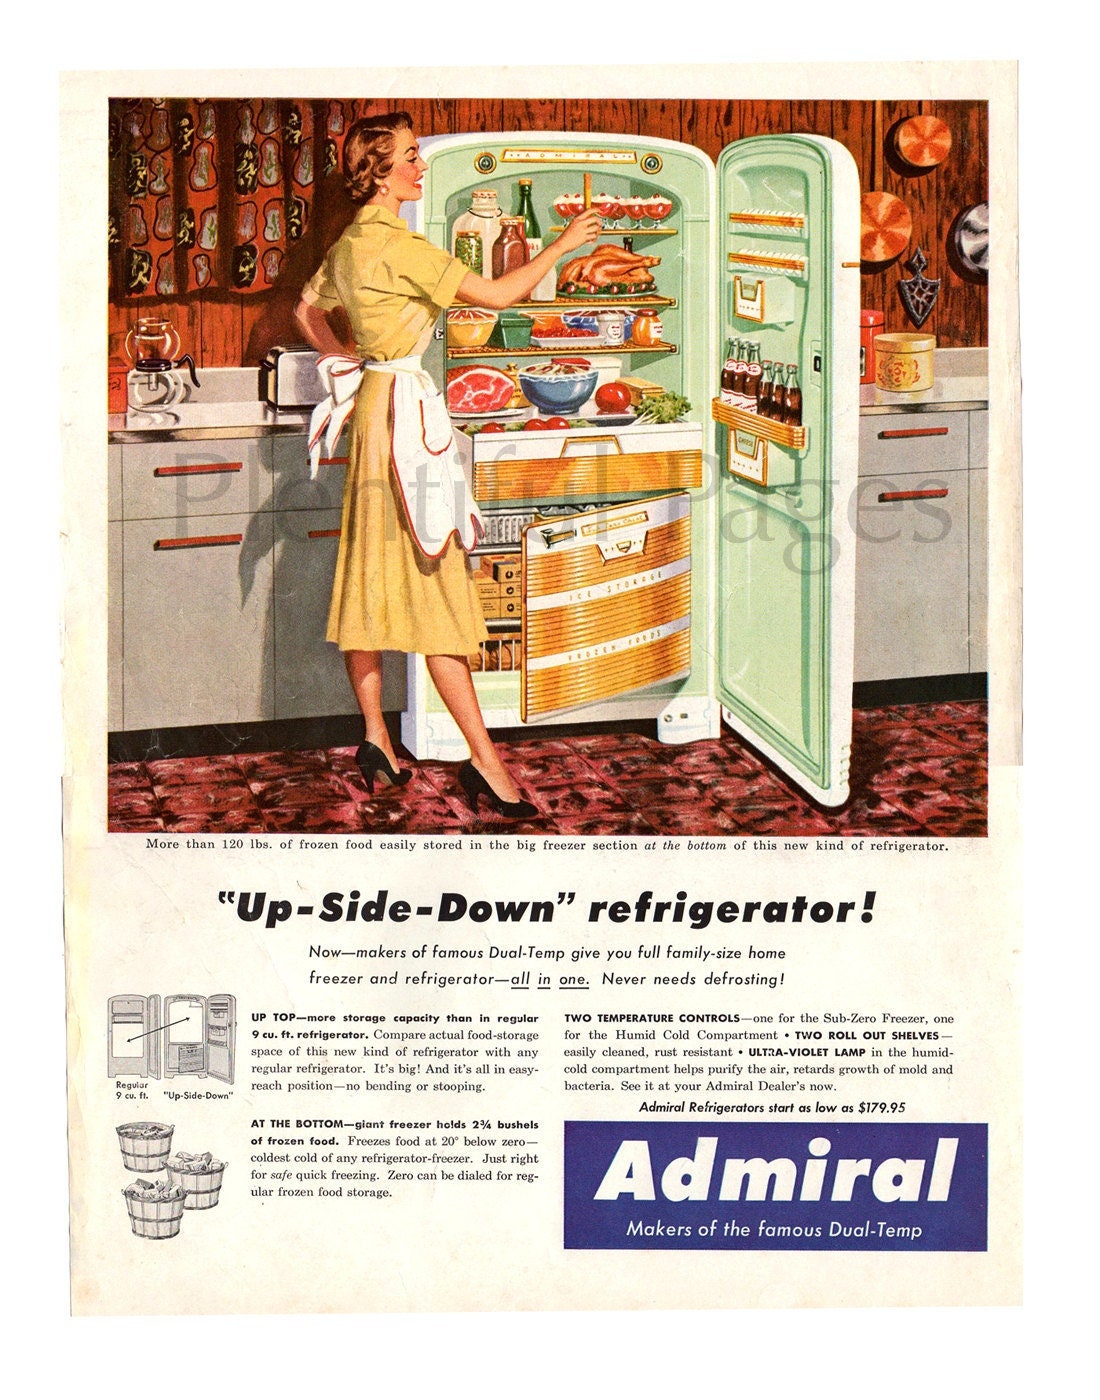 1954 Admiral Refrigerator Vintage Ad 1950s Housewife